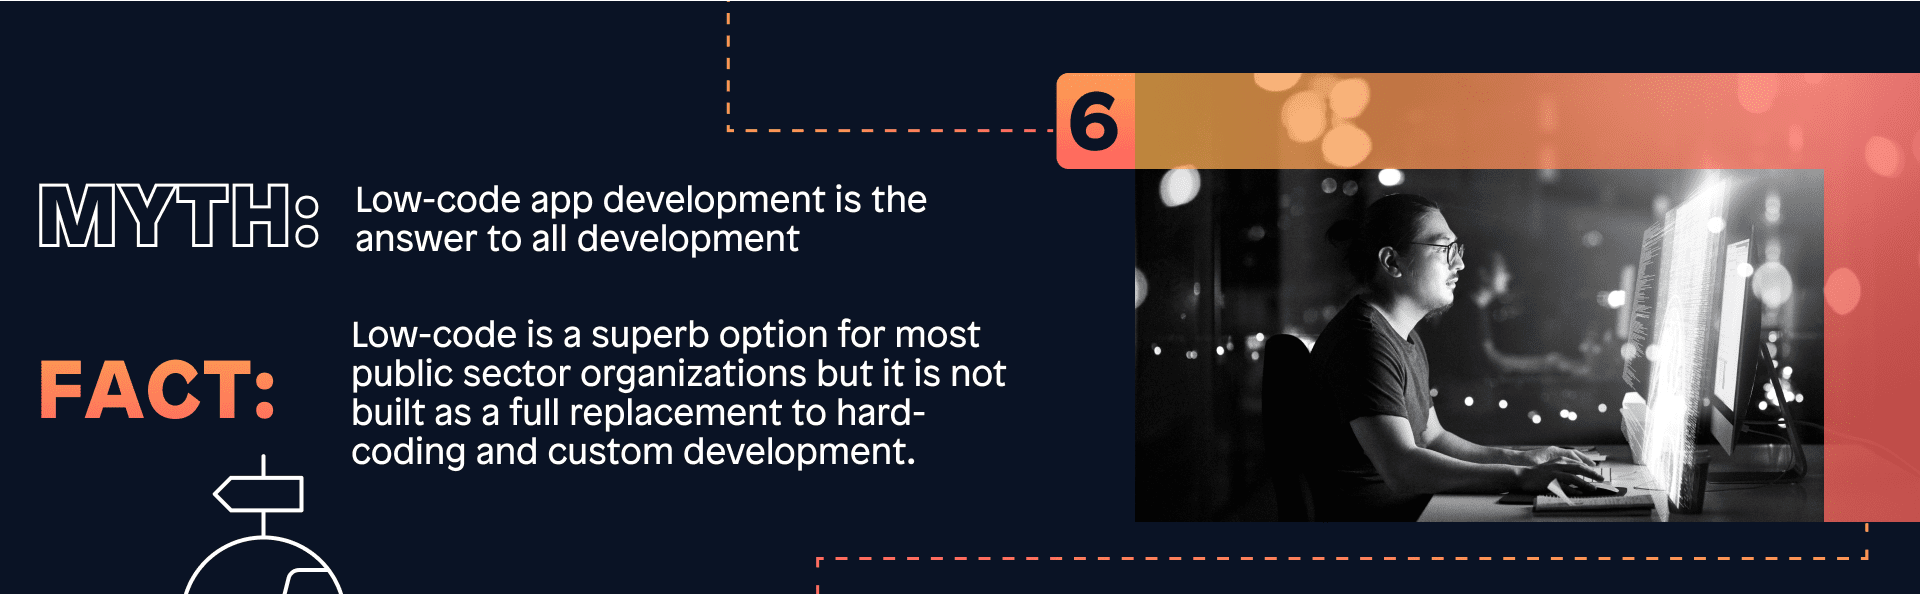 Myth: Low-code app development is the answer to all development; Fact: Low-code is a superb option for most public sector organizations but it is not built as a full replacement to hard-coding and custom development. 